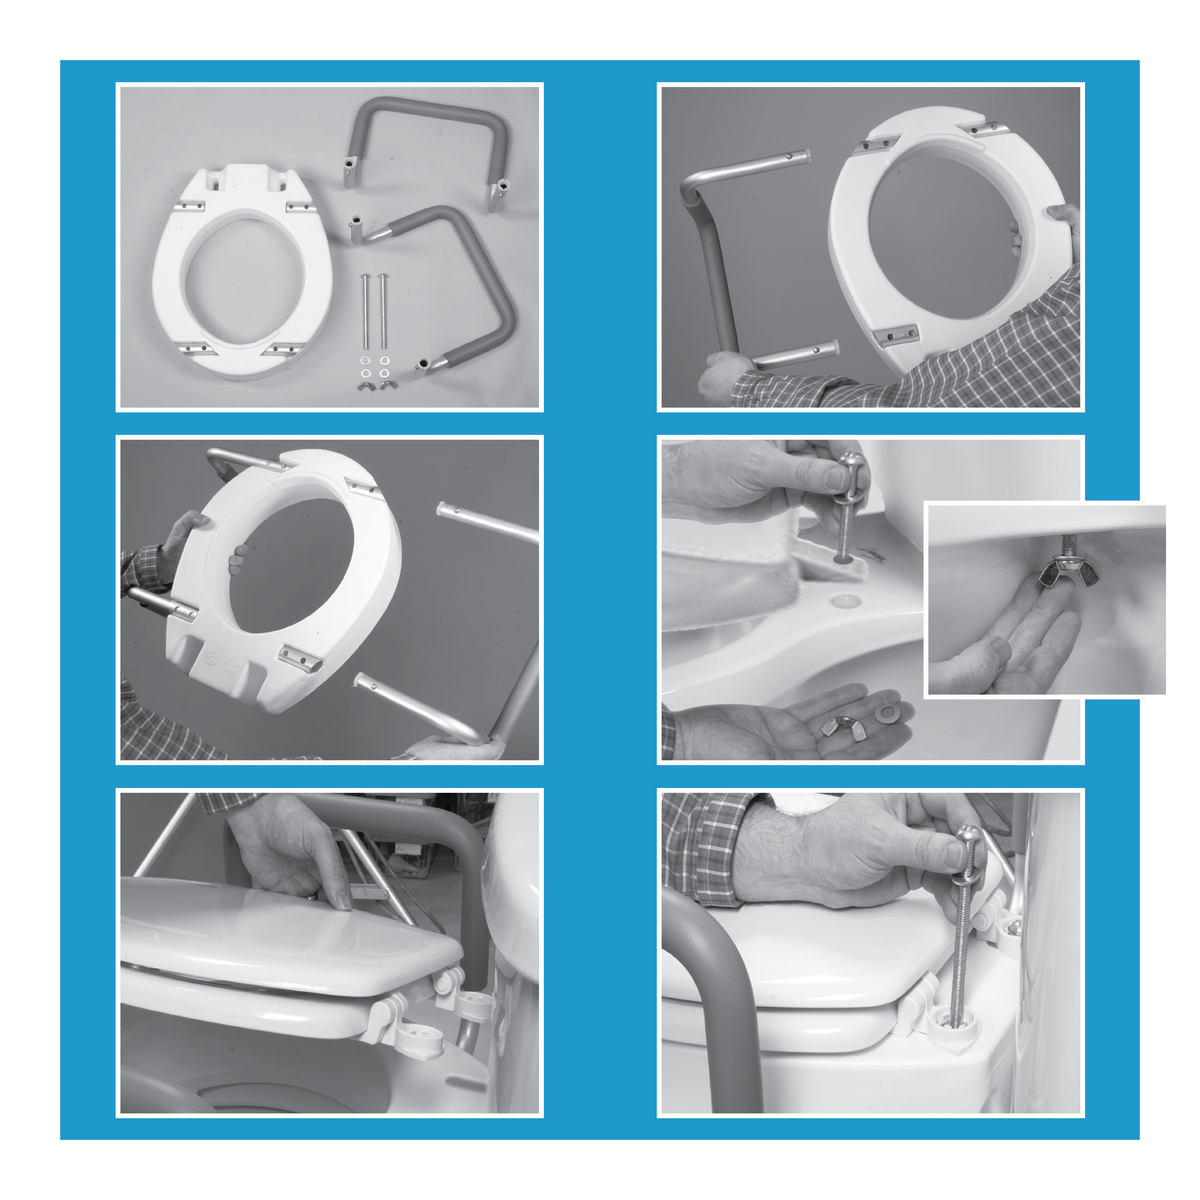 Various images showing the steps to install the Carex Toilet Seat Elevator 